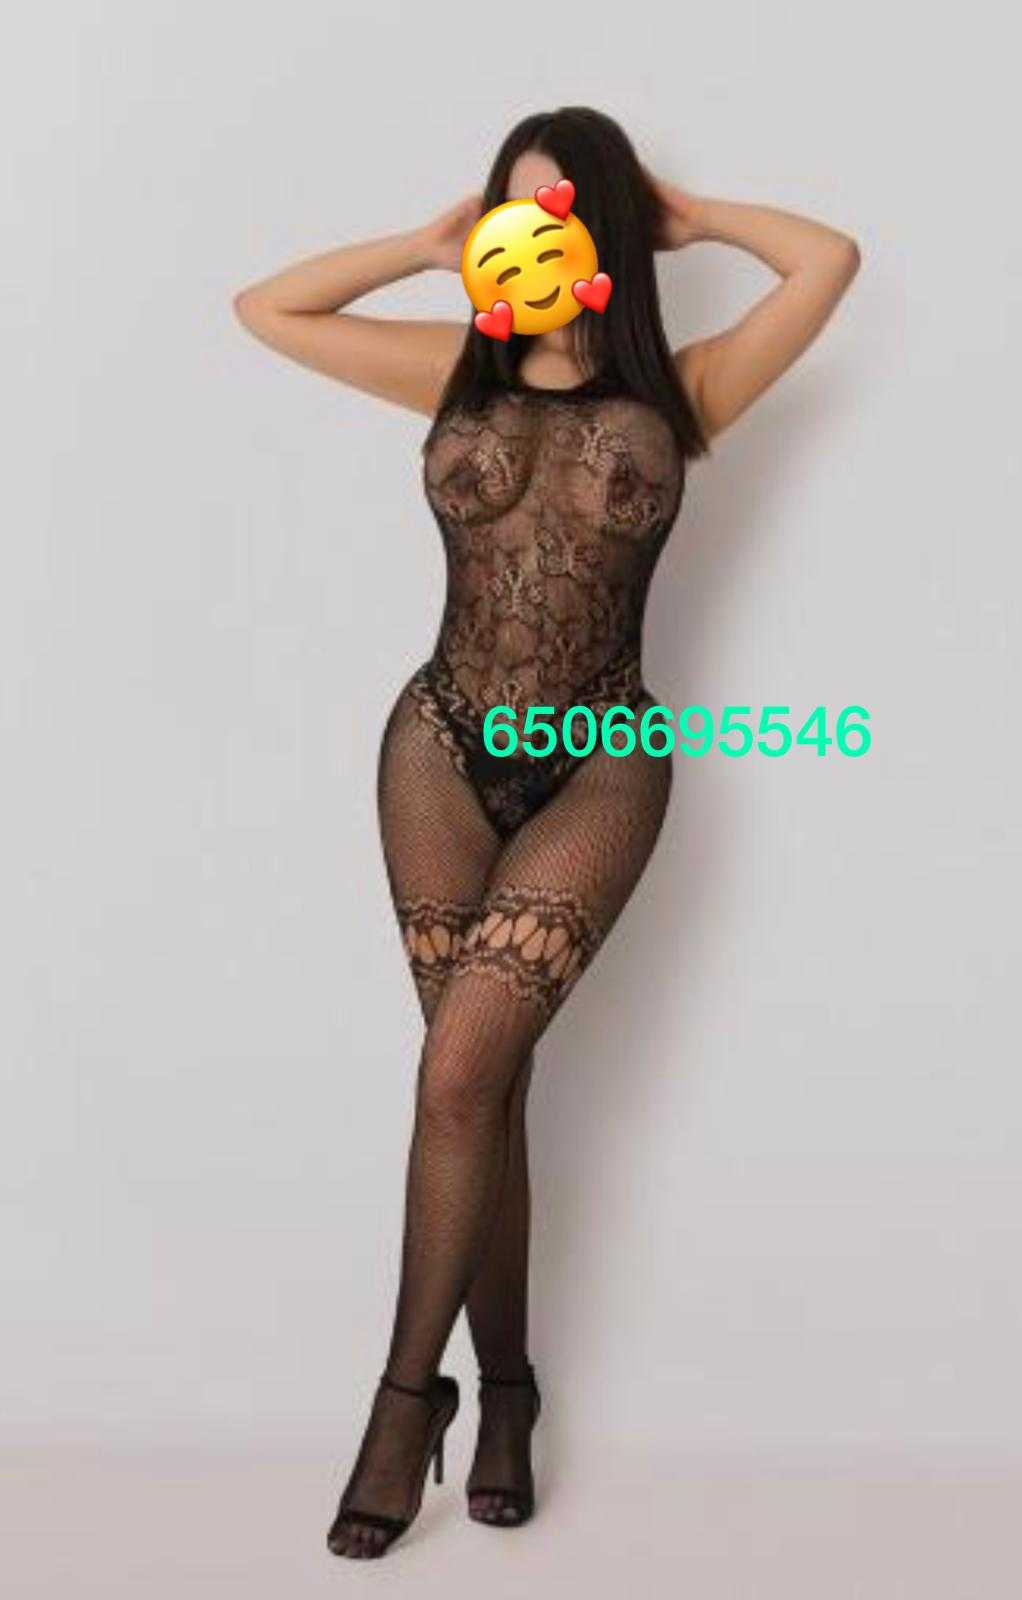 Reviews about escort with phone number 6506695546